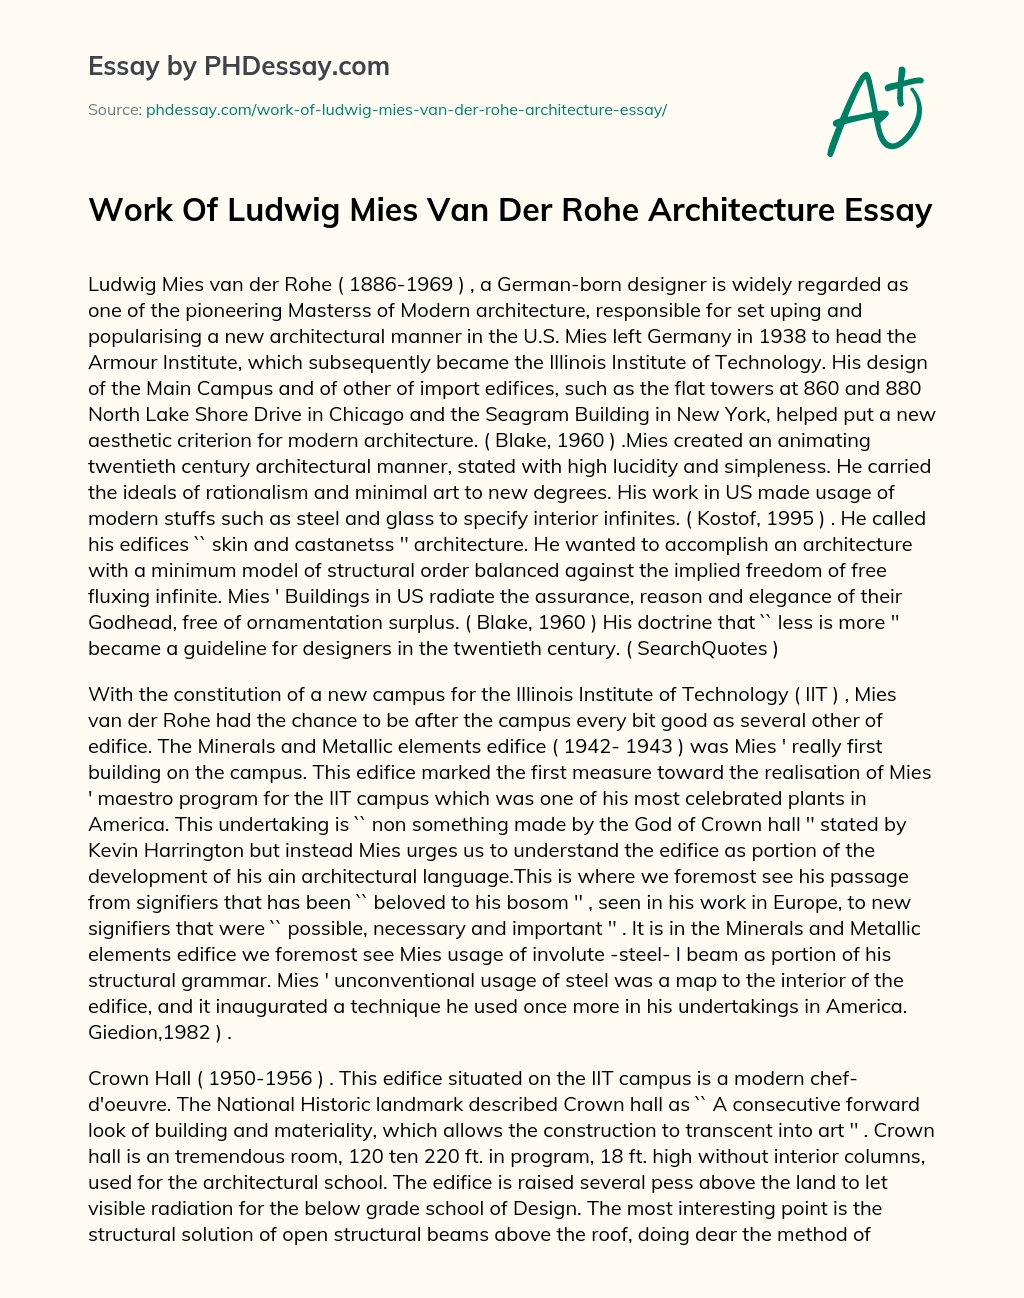 Work Of Ludwig Mies Van Der Rohe Architecture Essay essay